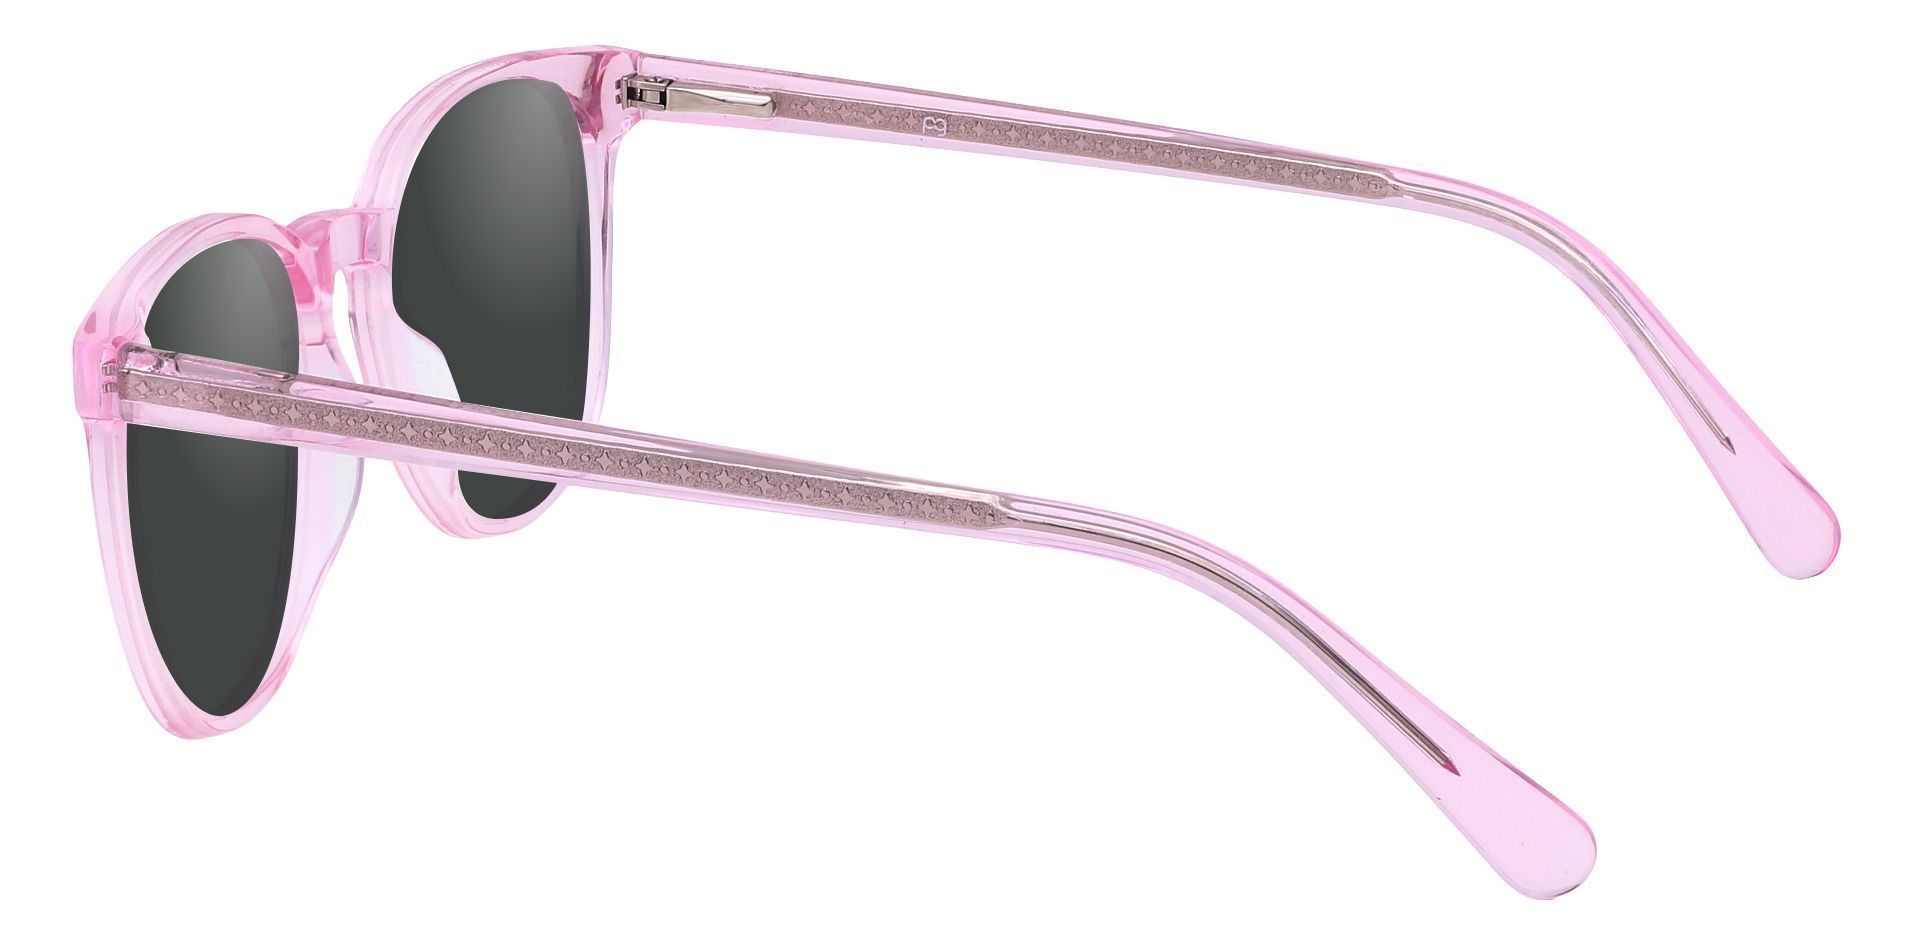 Nebula Round Non-Rx Sunglasses - Pink Frame With Gray Lenses